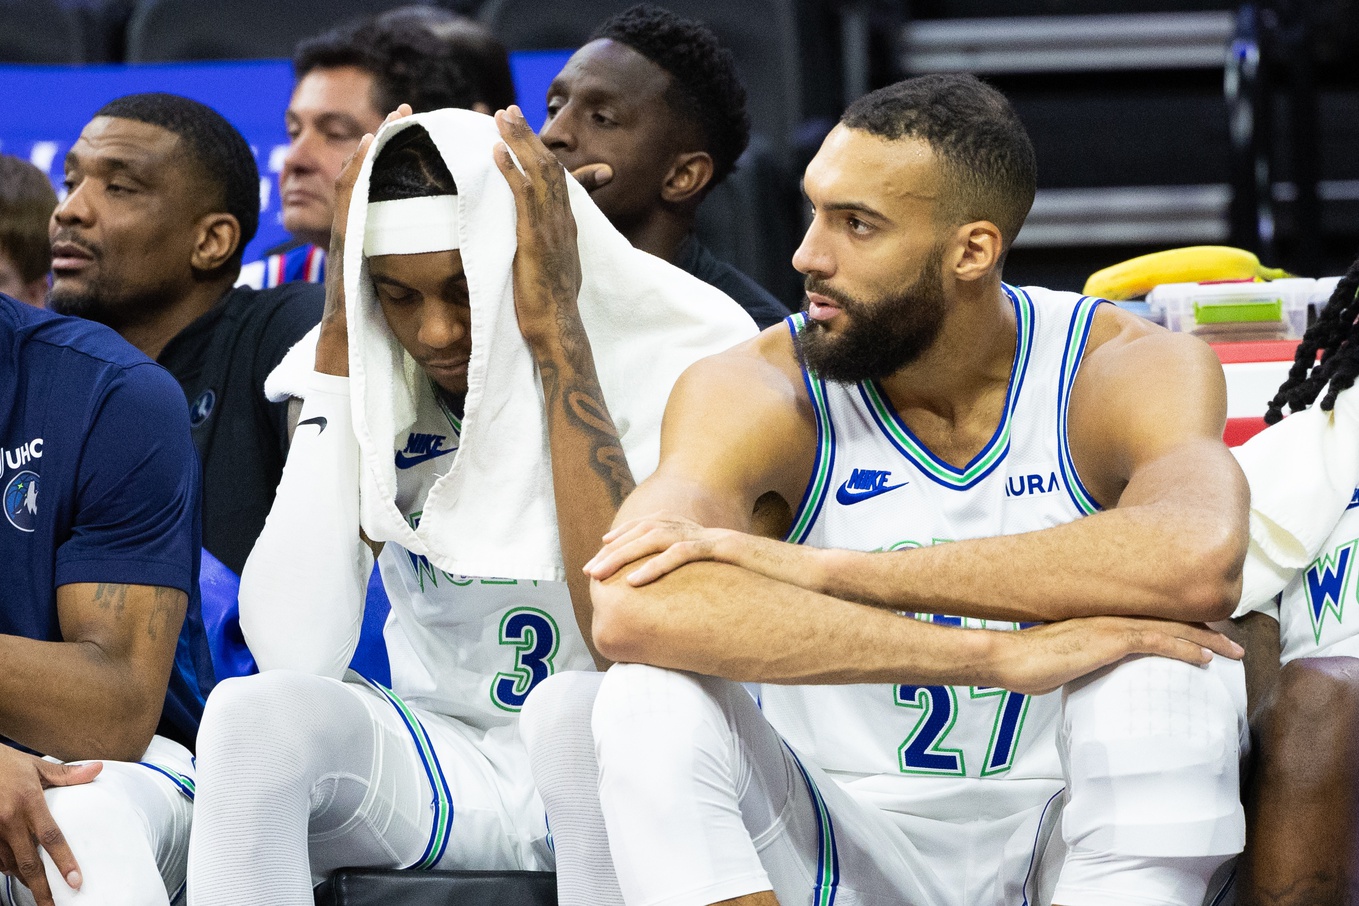 Minnesota Timberwolves forward Jaden McDaniels (3) and center Rudy Gobert (27) look on from the bench during the fourth quarter against the Philadelphia 76ers at Wells Fargo Center.